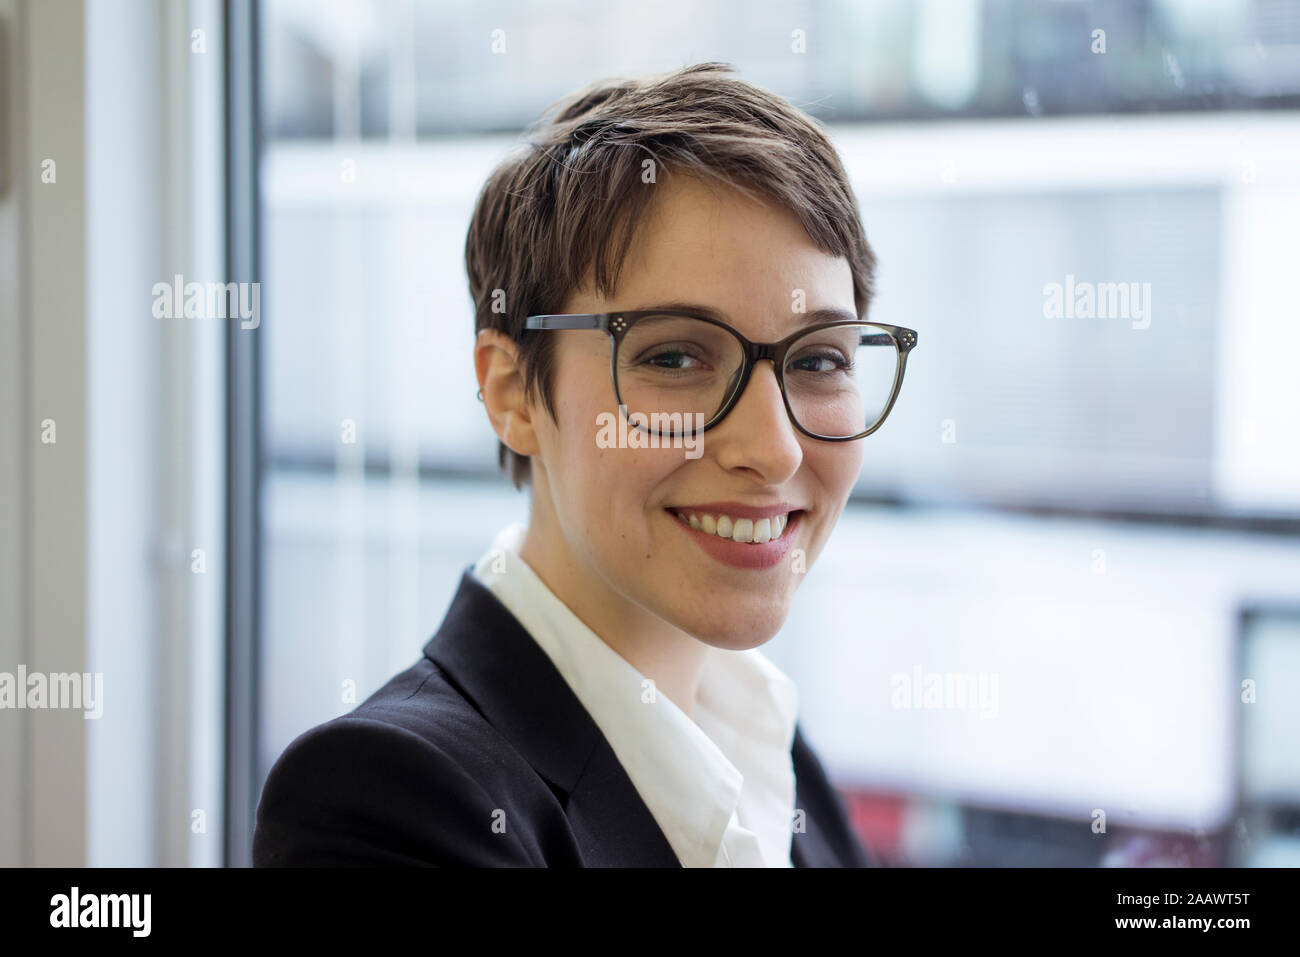 Portait of smiling young businesswoman at the window Stock Photo